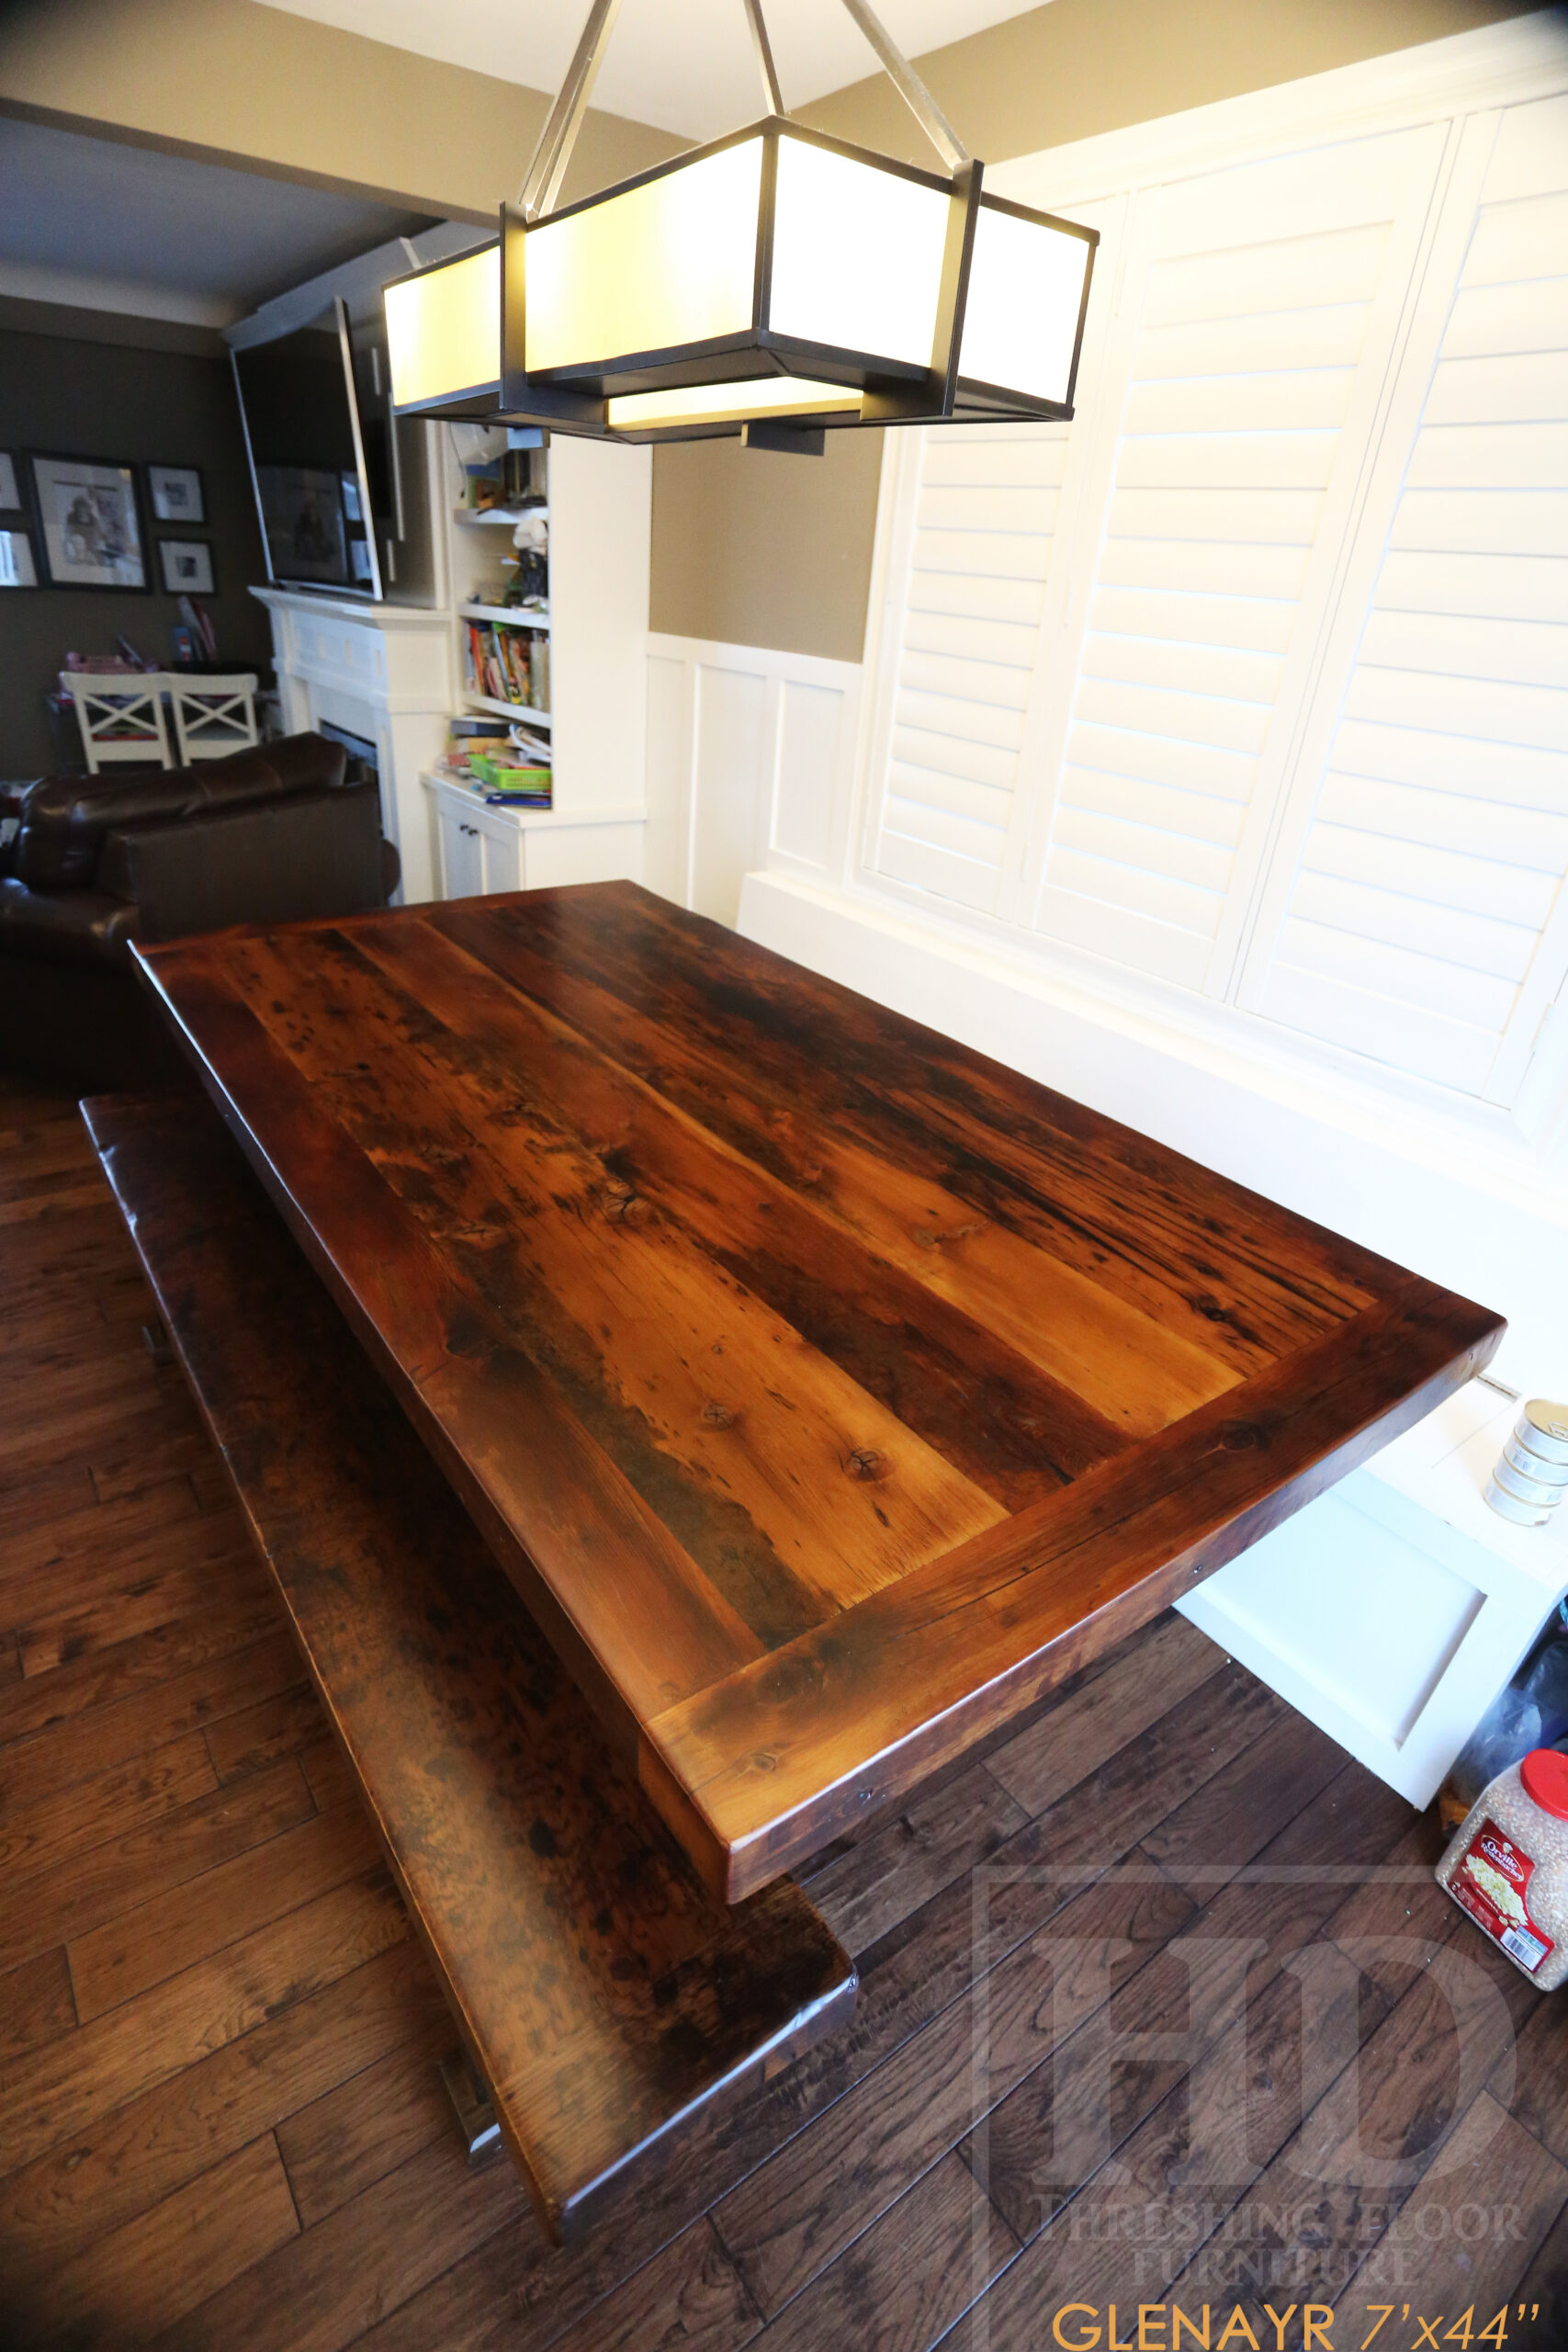 Project details: 7' Reclaimed Ontario Barnwood Table we made for a Welland, Ontario home - 44" wide â€“ Beam Option Sawbuck Base â€“ Extra Thick 3â€ Joist Material Top - Reclaimed Old Growth Hemlock Threshing Floor Construction â€“ Bread edge Ends - Original edges & distressing maintained - Premium epoxy + satin polyurethane finish â€“ 7â€™ [matching] Trestle Bench â€“ 2 Strongback Chairs / Wormy Maple / Polyurethane Clearcoat Finish - www.table.ca